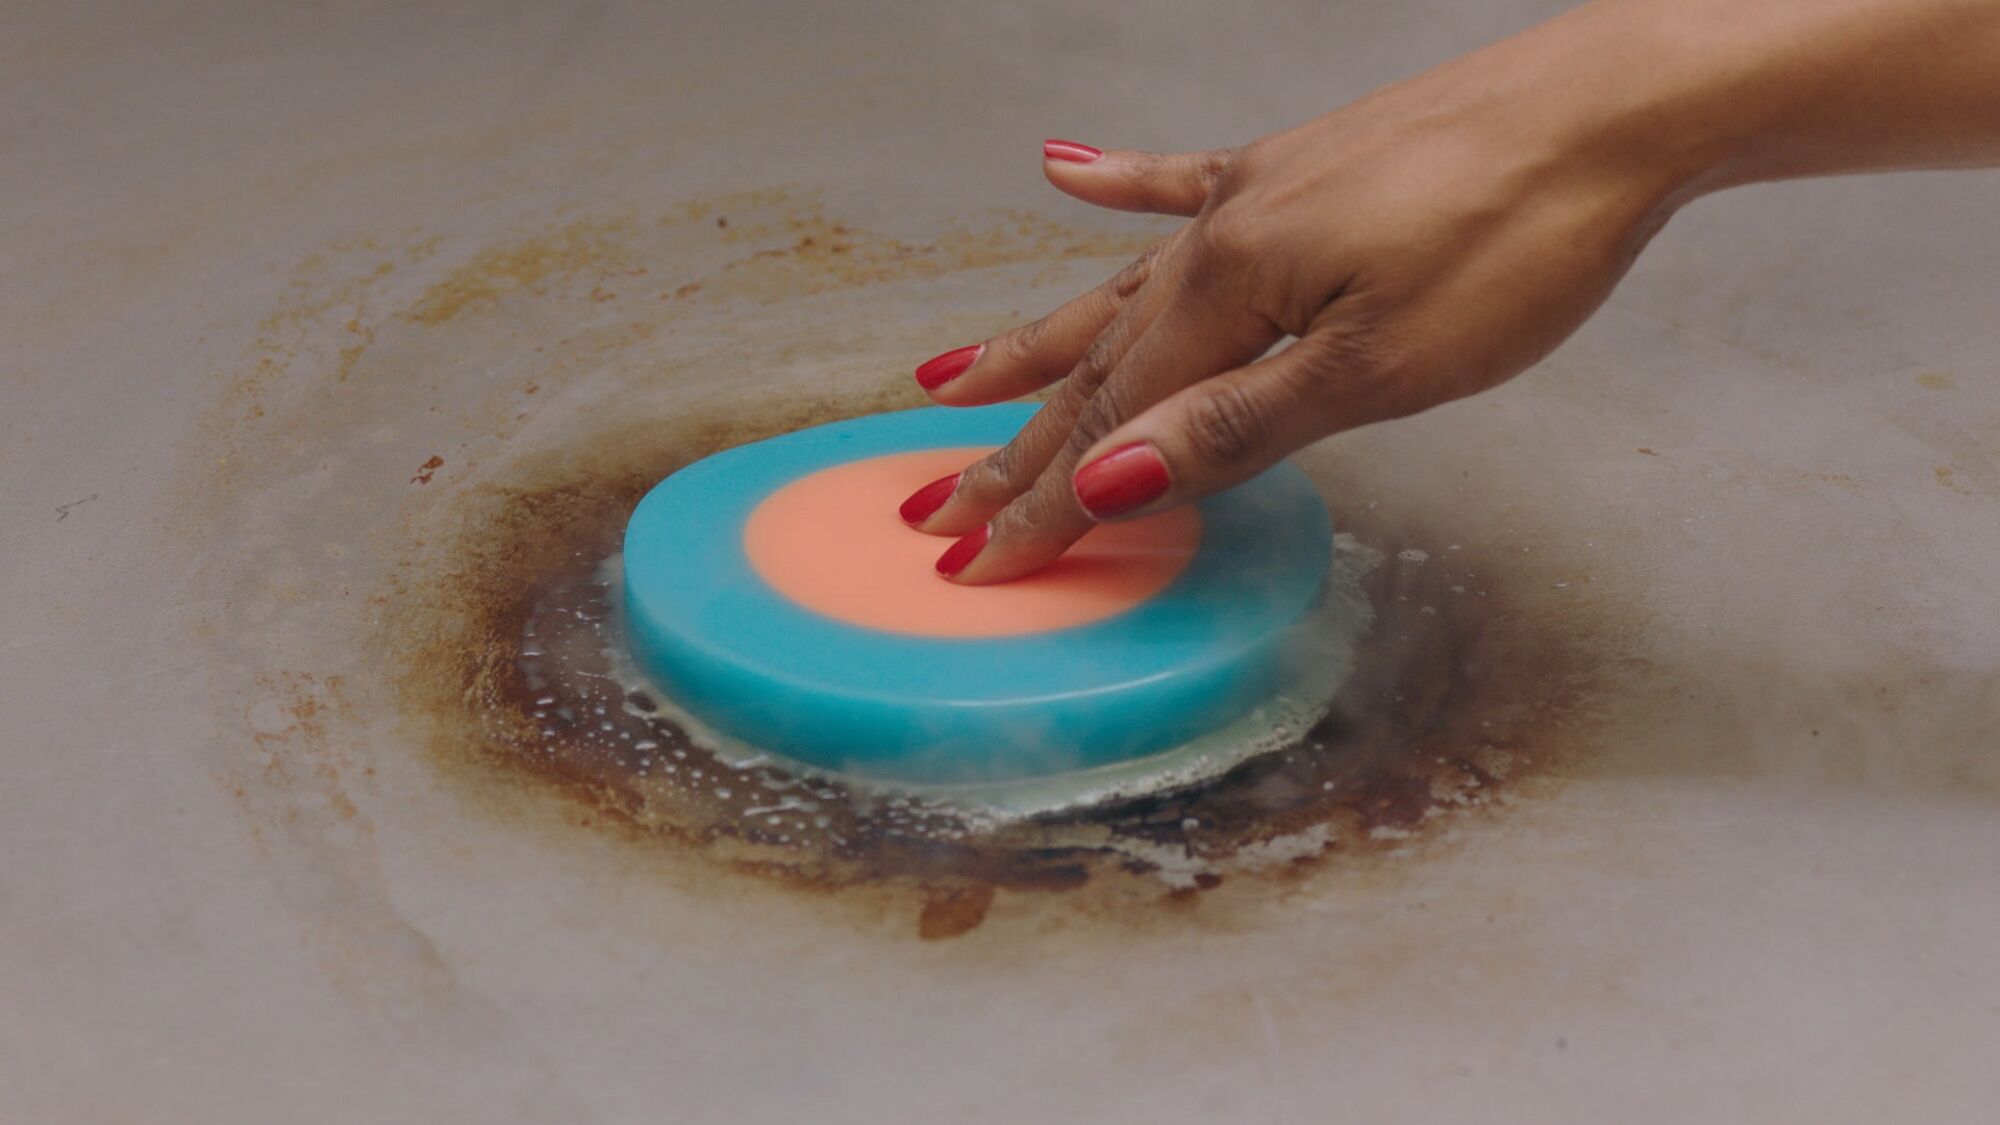 A circular pancake of dense blue and peach gelatin is pushed into a pan by a woman's hand with painted red nails.